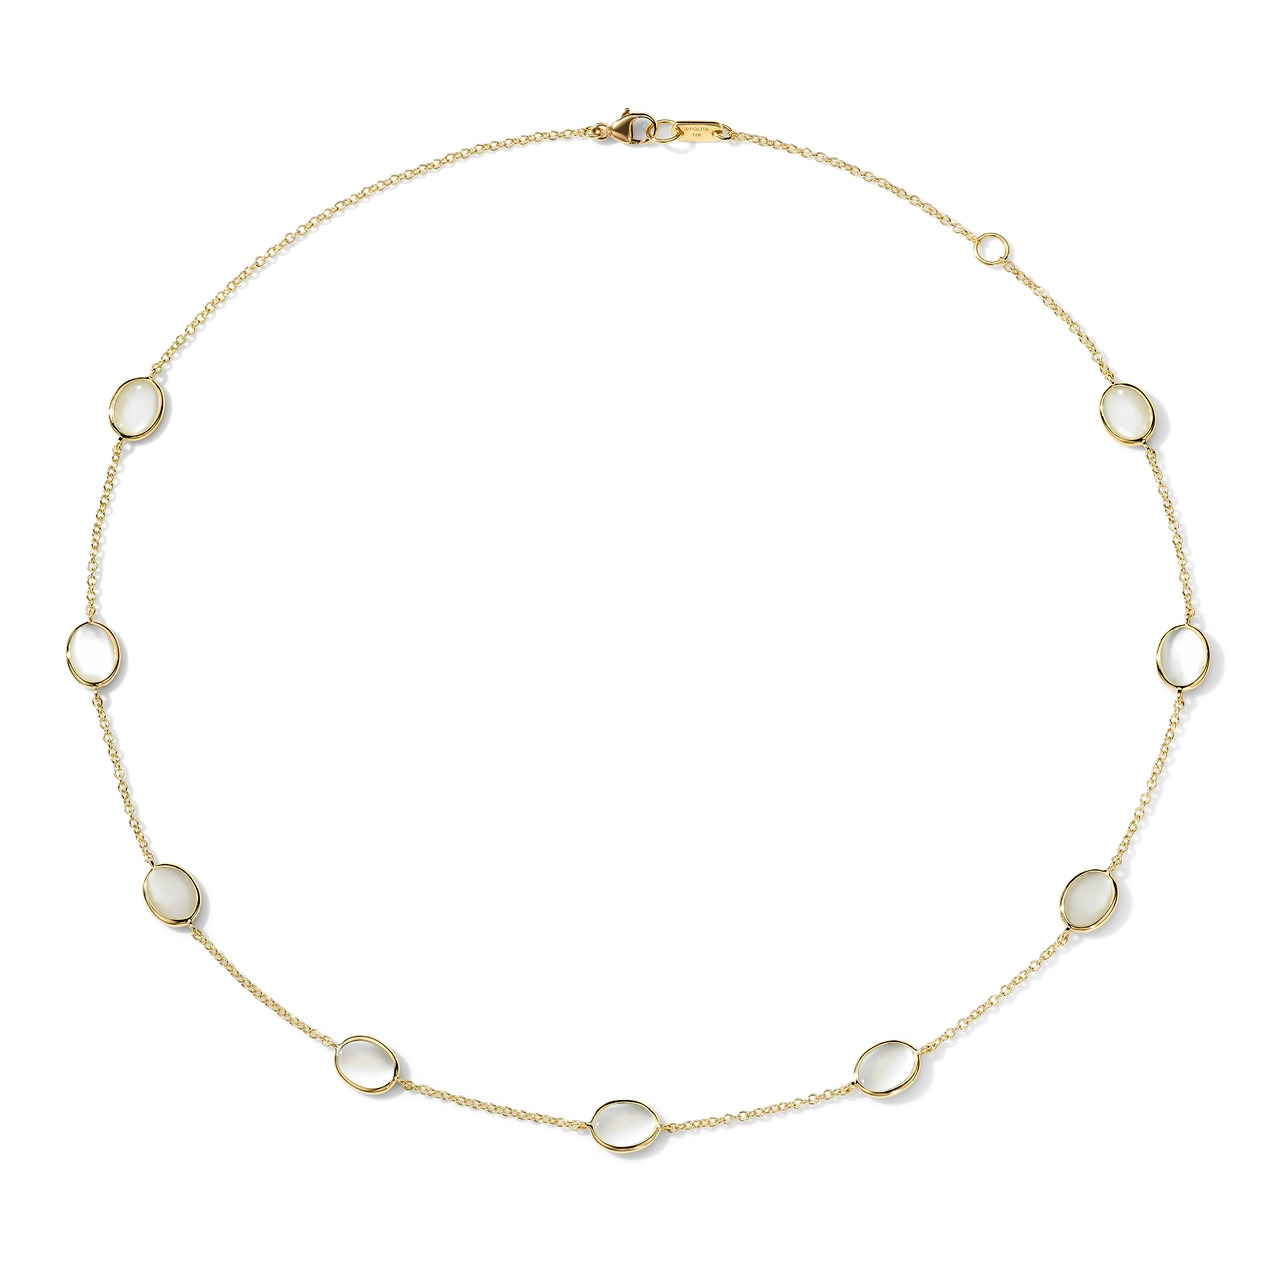 Ippolita 18k Polished Rock Candy Confetti Mother of Pearl Slice Necklace 0